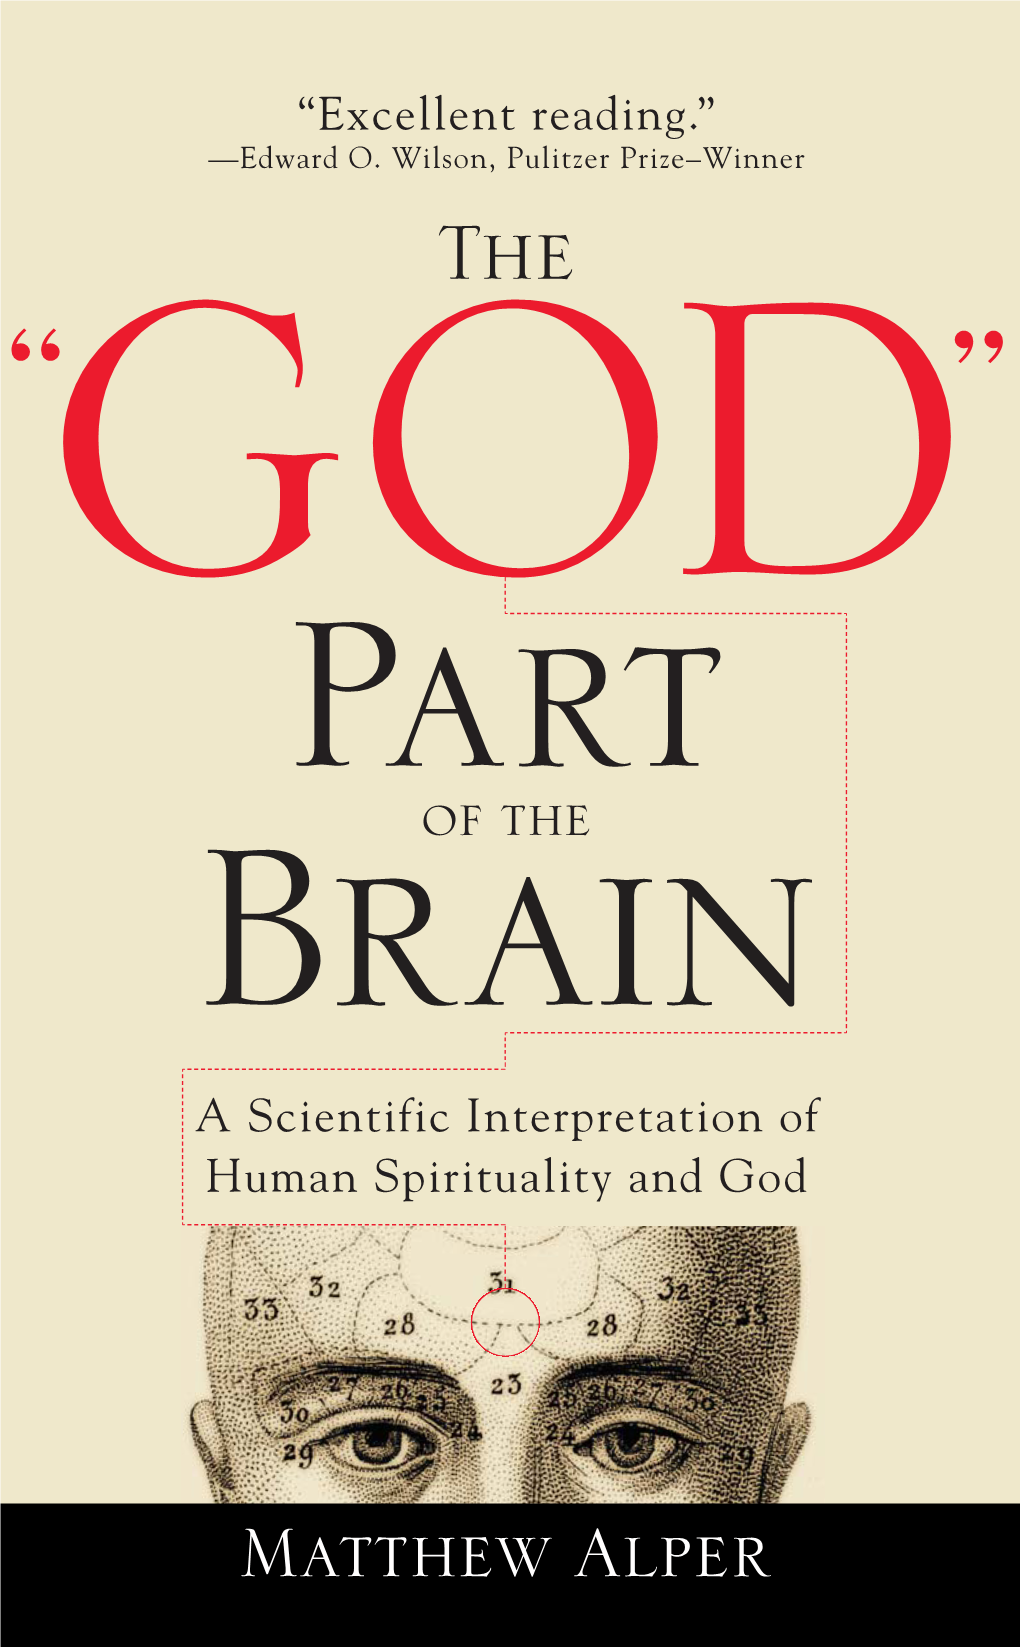 God Part of the Brain